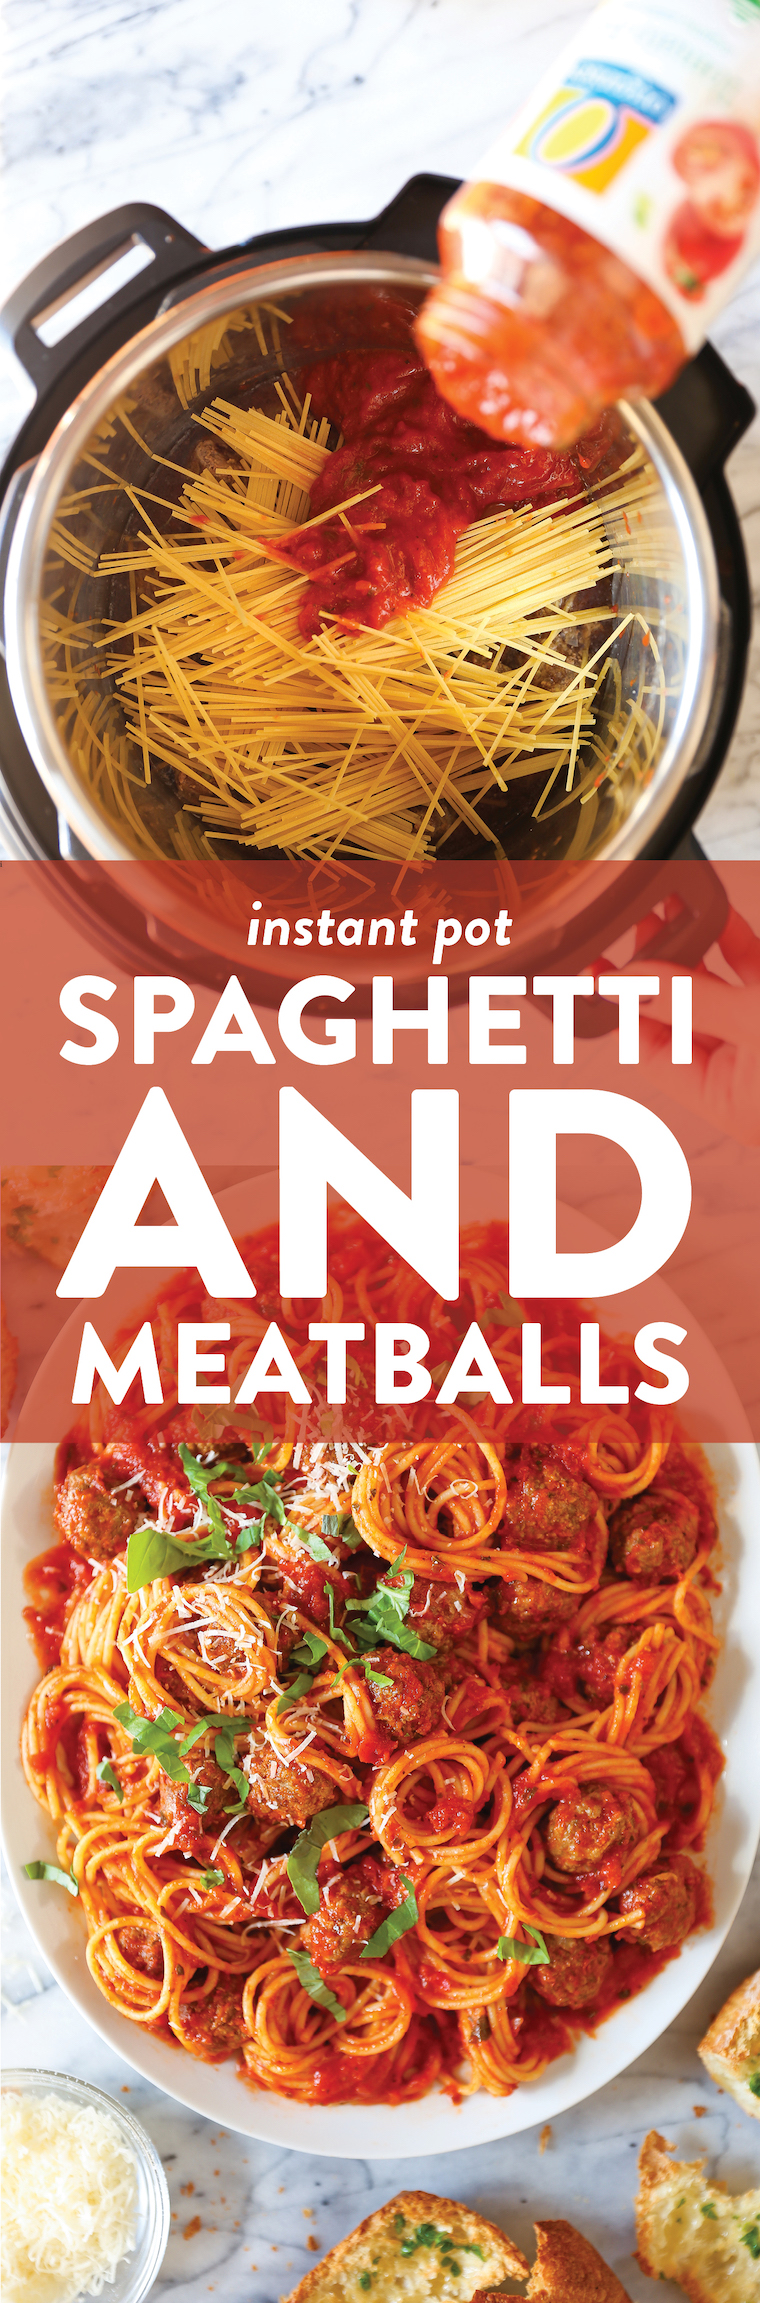 Instant Pot Spaghetti and Meatballs - A ONE POT meal made in your pressure cooker with homemade meatballs (not frozen!). Still so quick and easy to whip up!